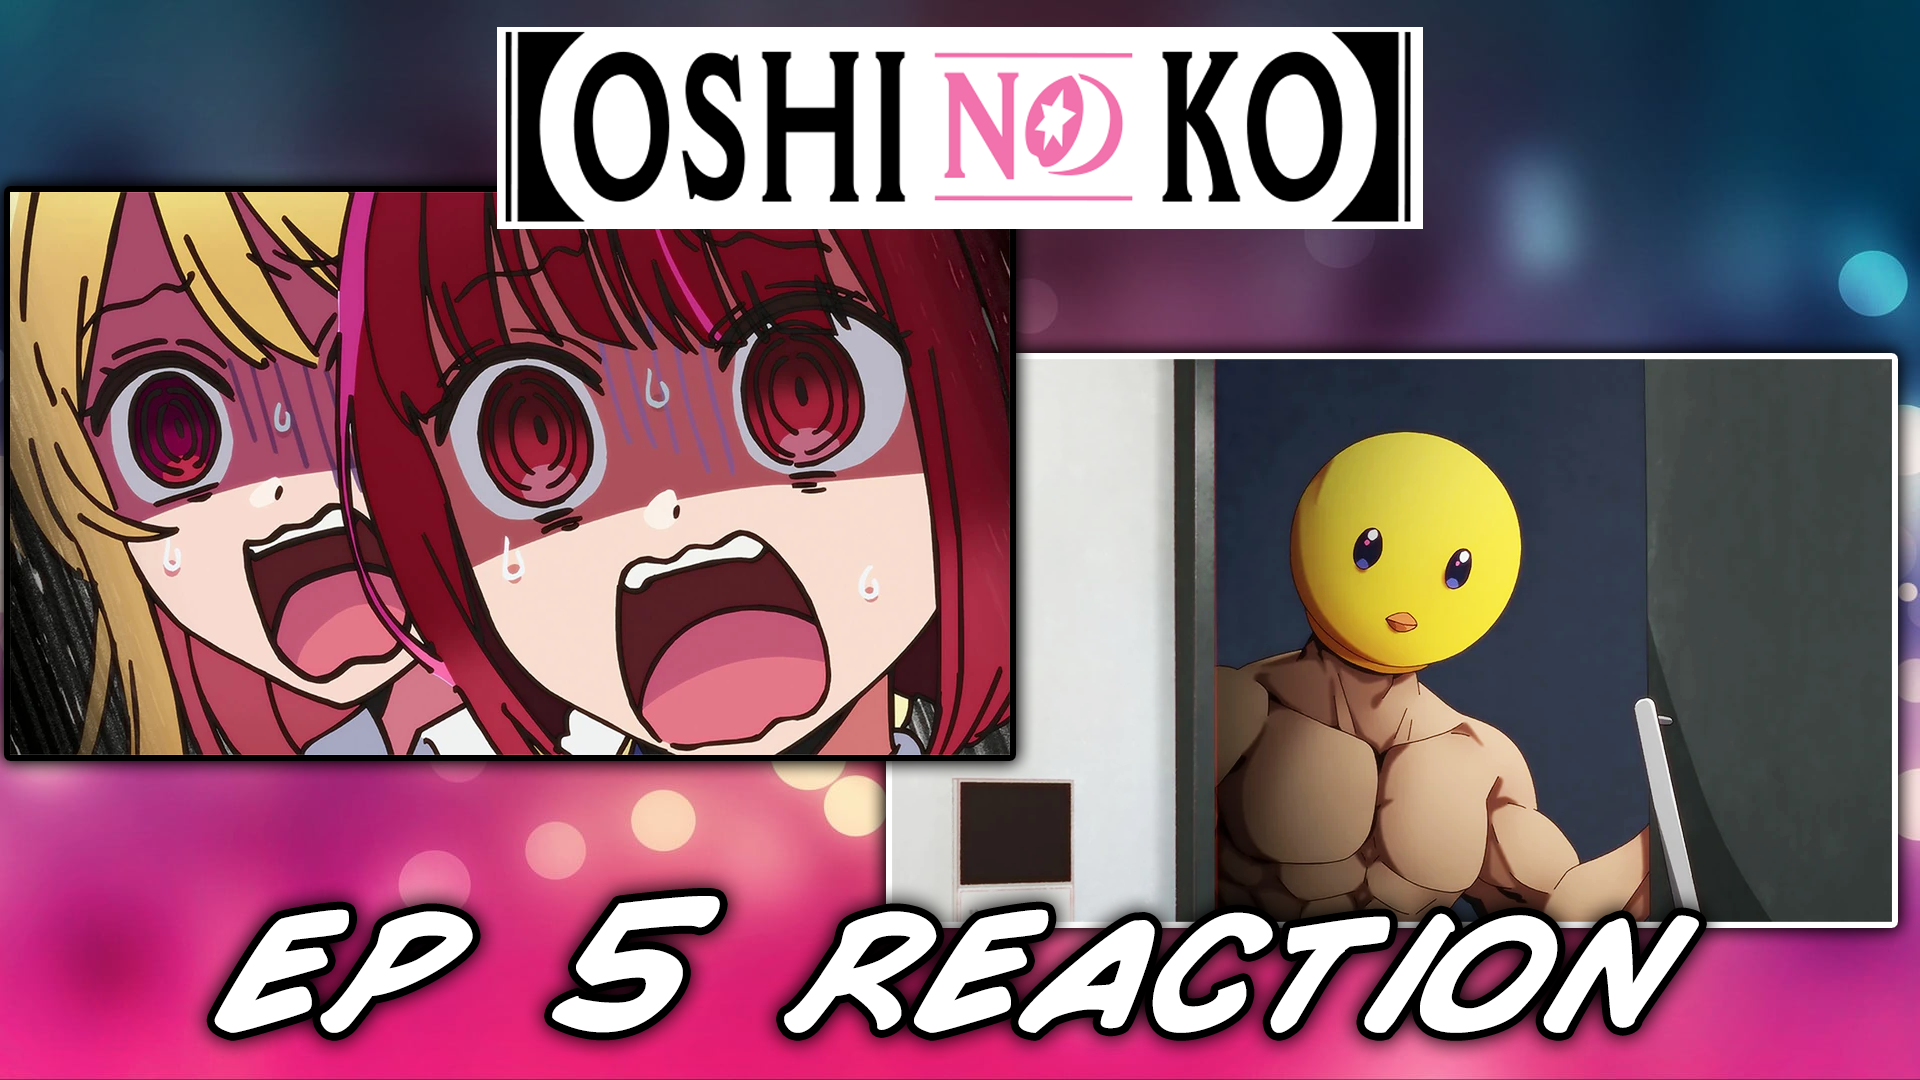 Oshi no Ko Episode 5 Reaction  THIS EPISODE GETS THE EASIEST 10